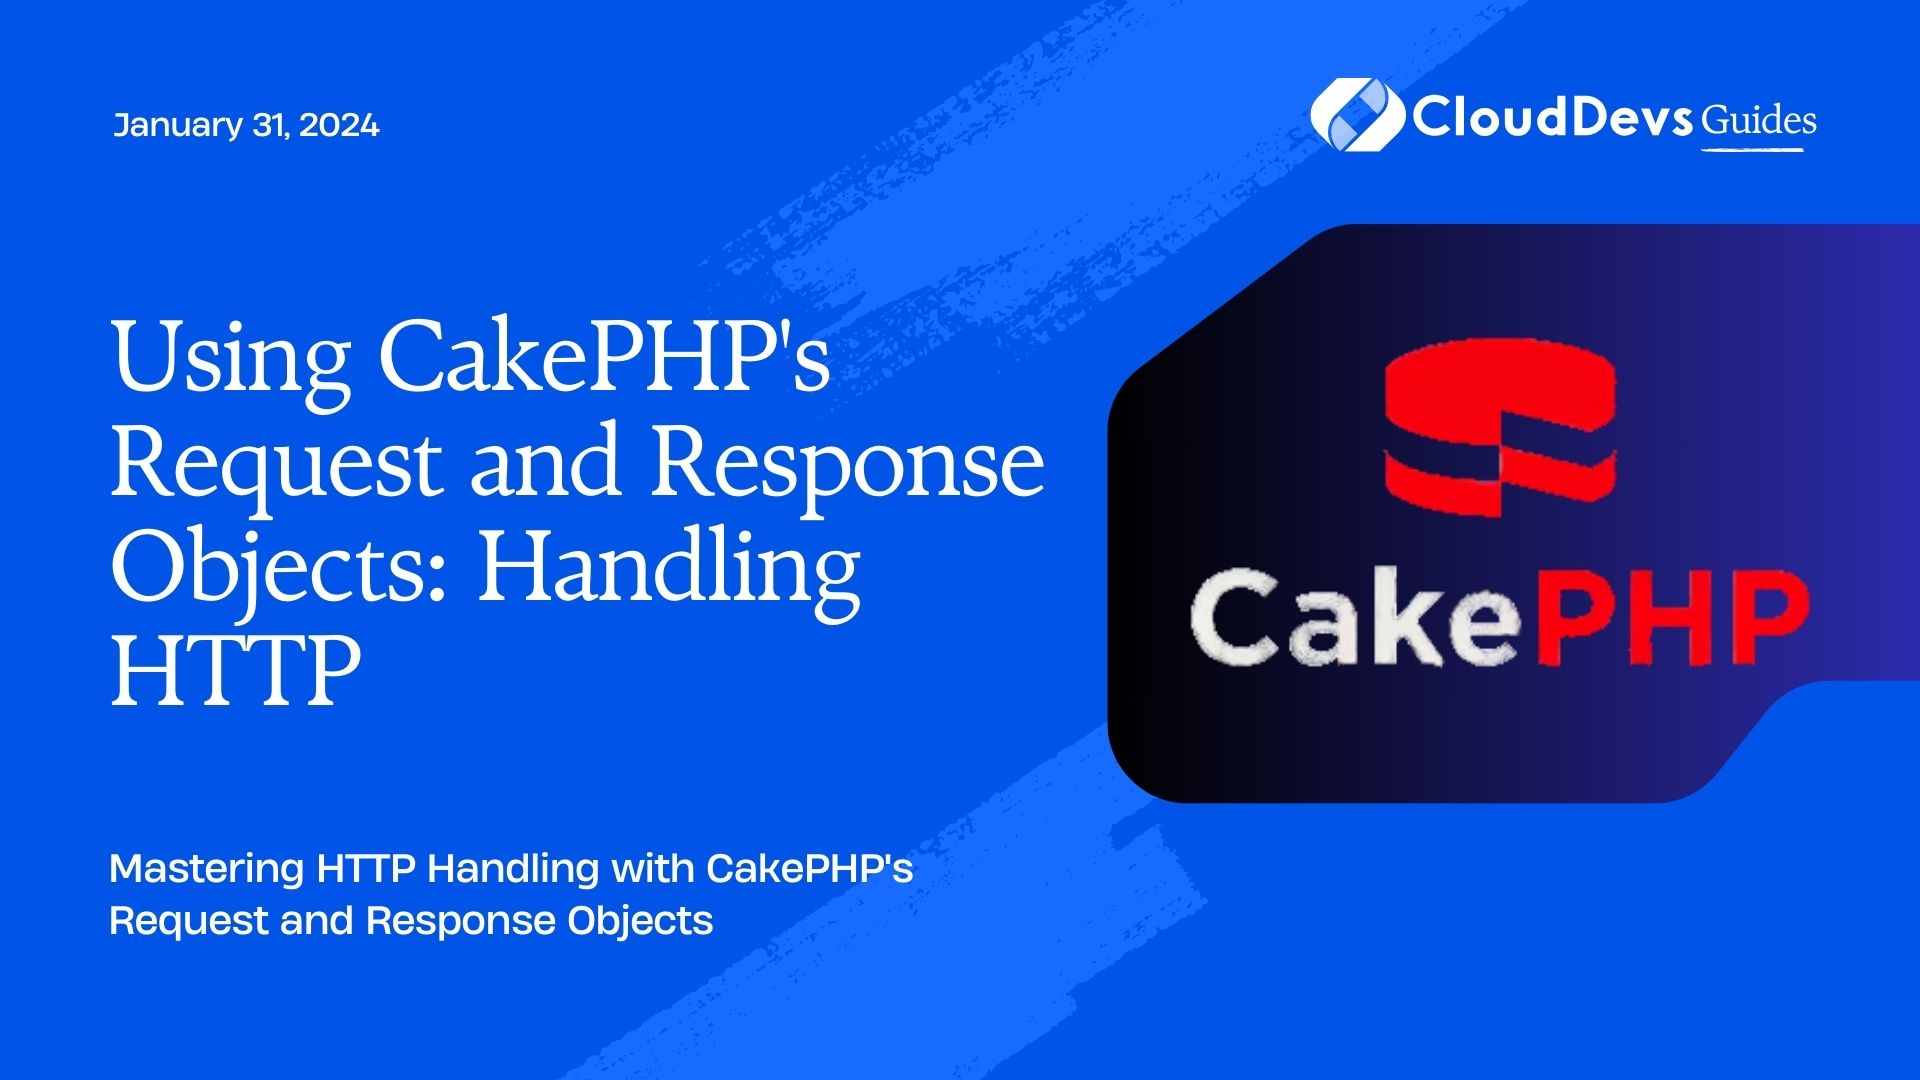 Using CakePHP's Request and Response Objects: Handling HTTP